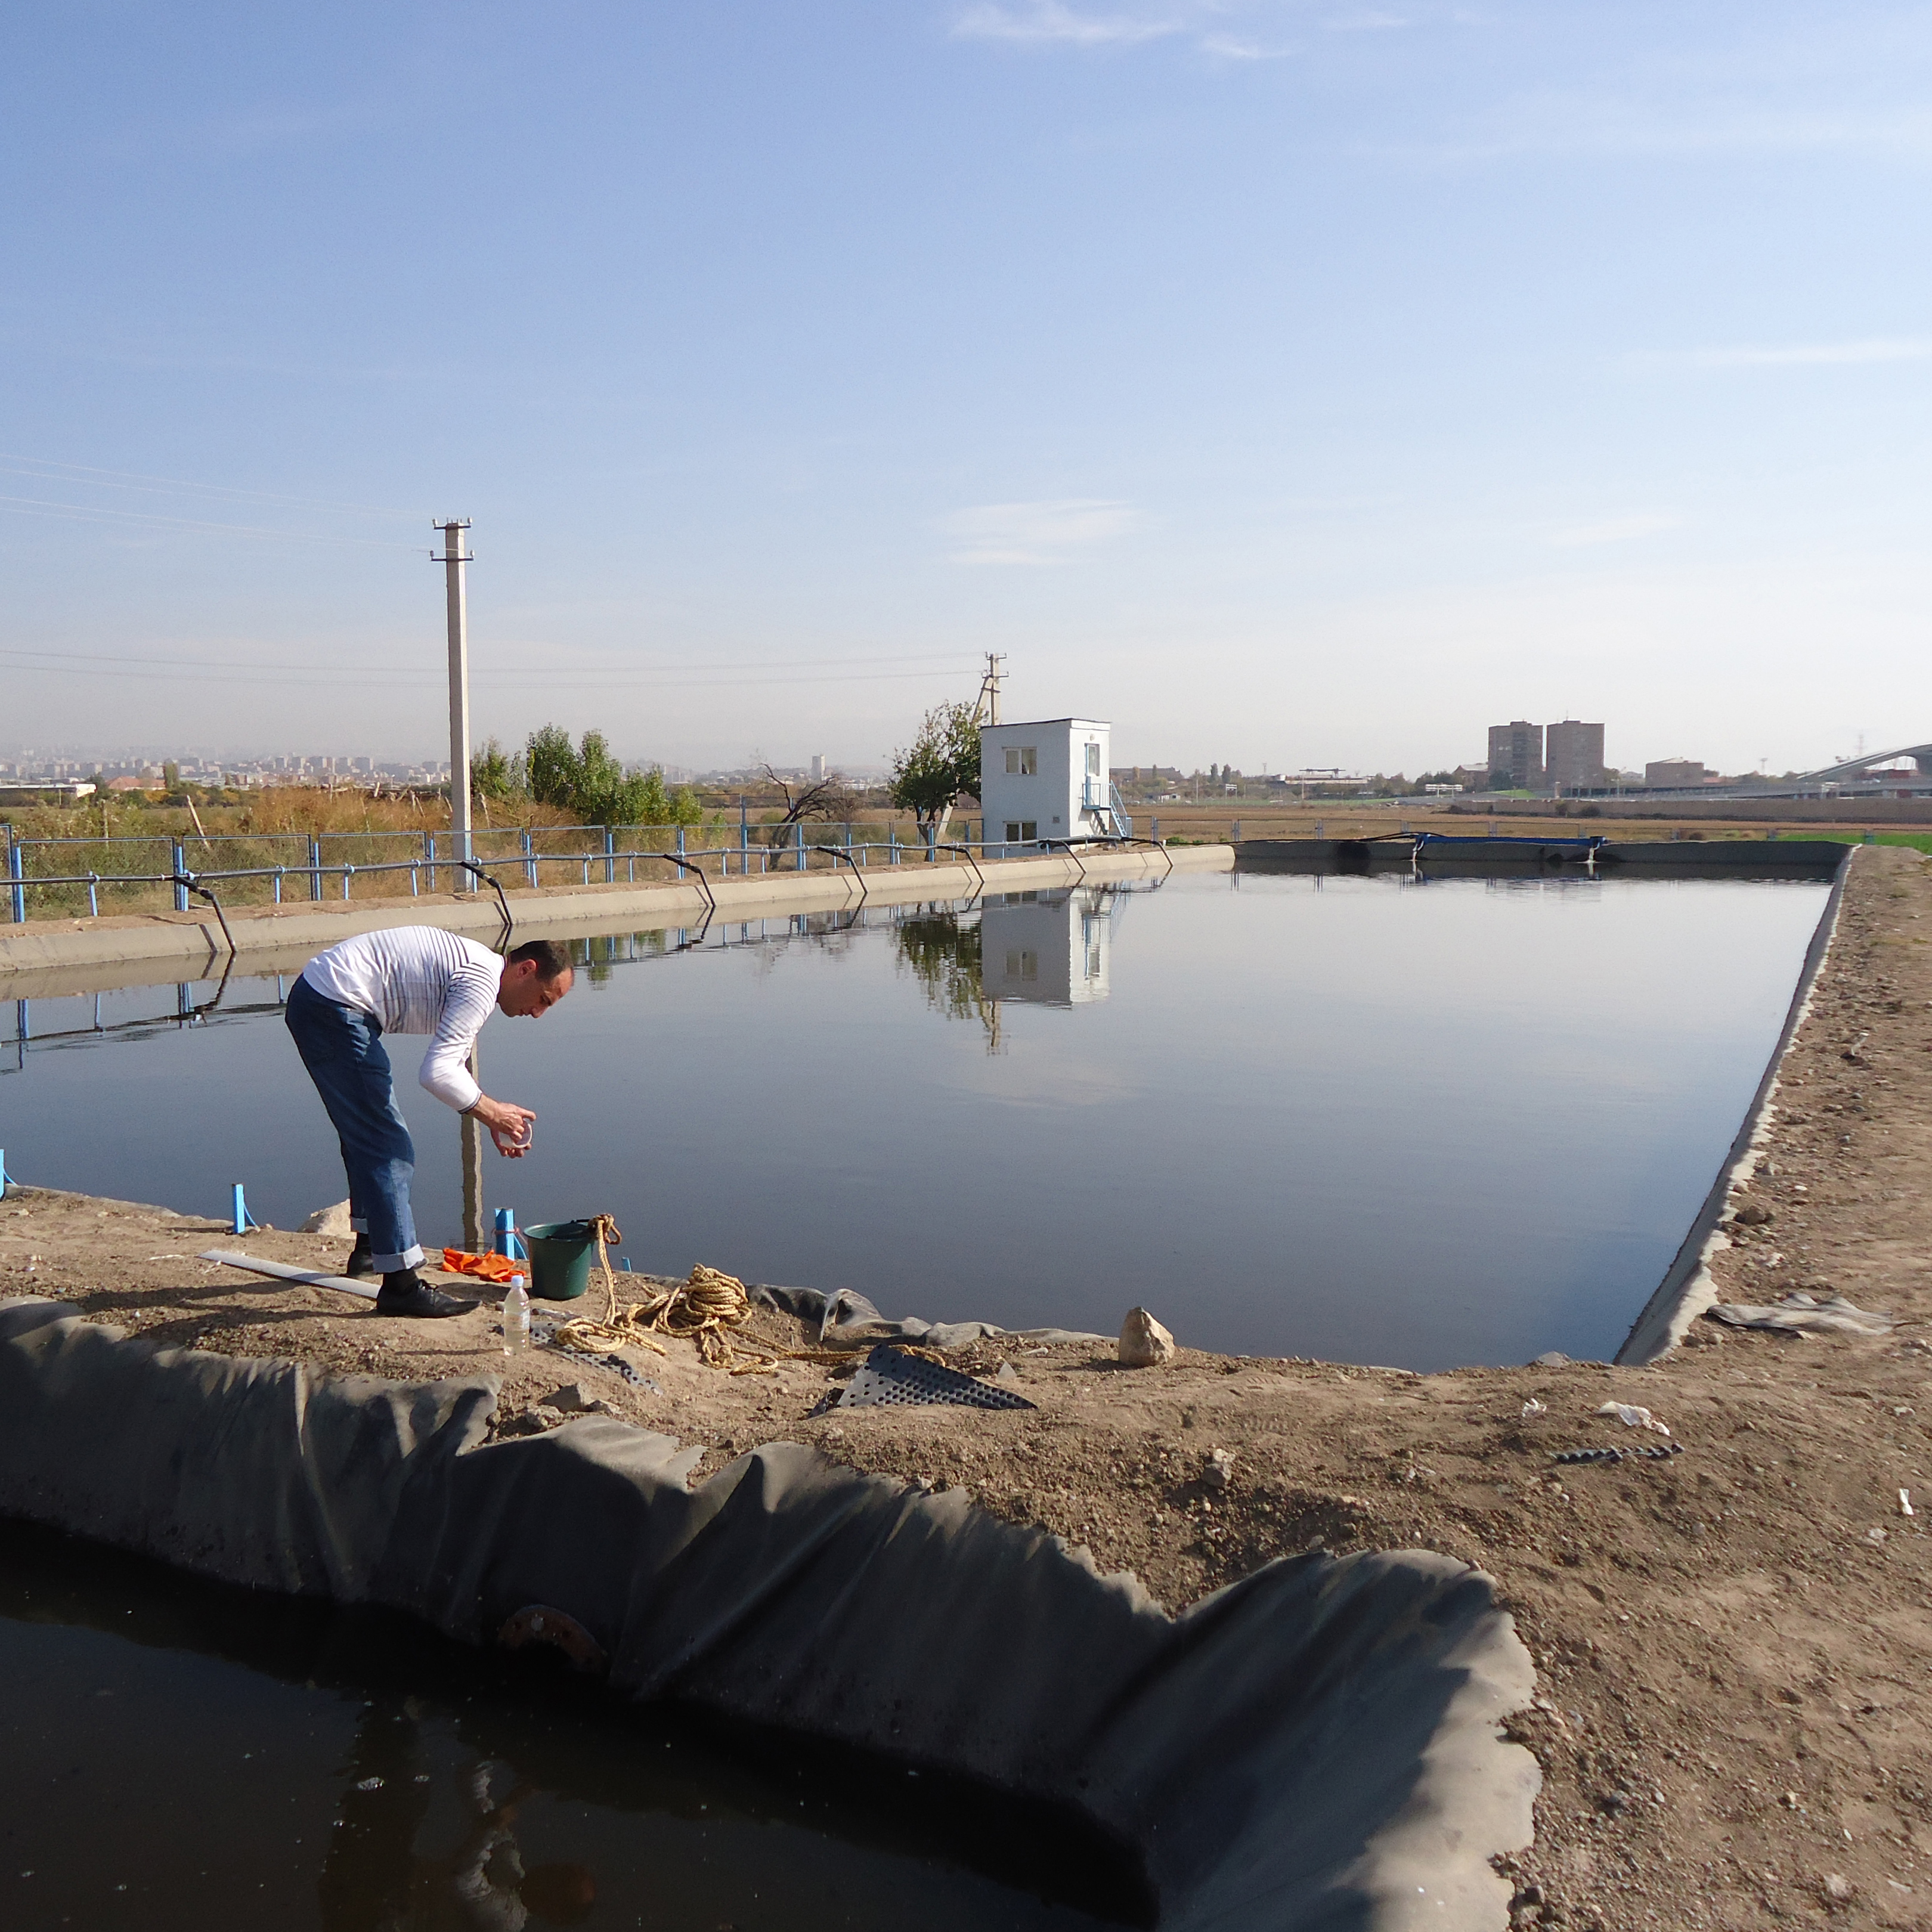 Rehabilitation of agricultural lands though application of biological ponds for domestic wastewater treatment in Parakar community of Armavir region